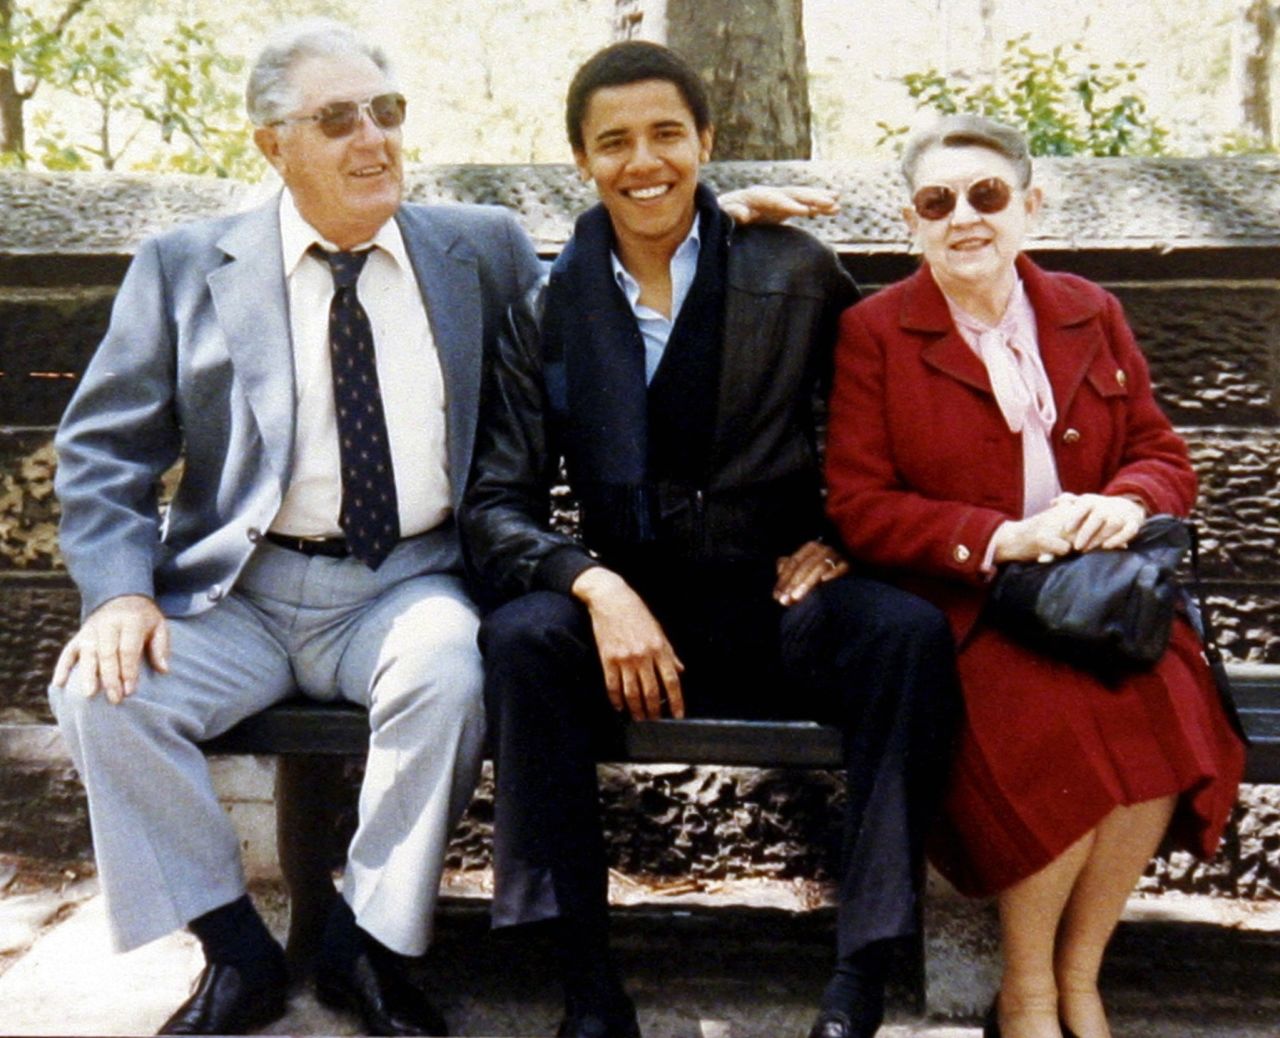 President Obama  with his maternal grandparents, Stanley and Madelyn Dunham, in an undated family snapshot.